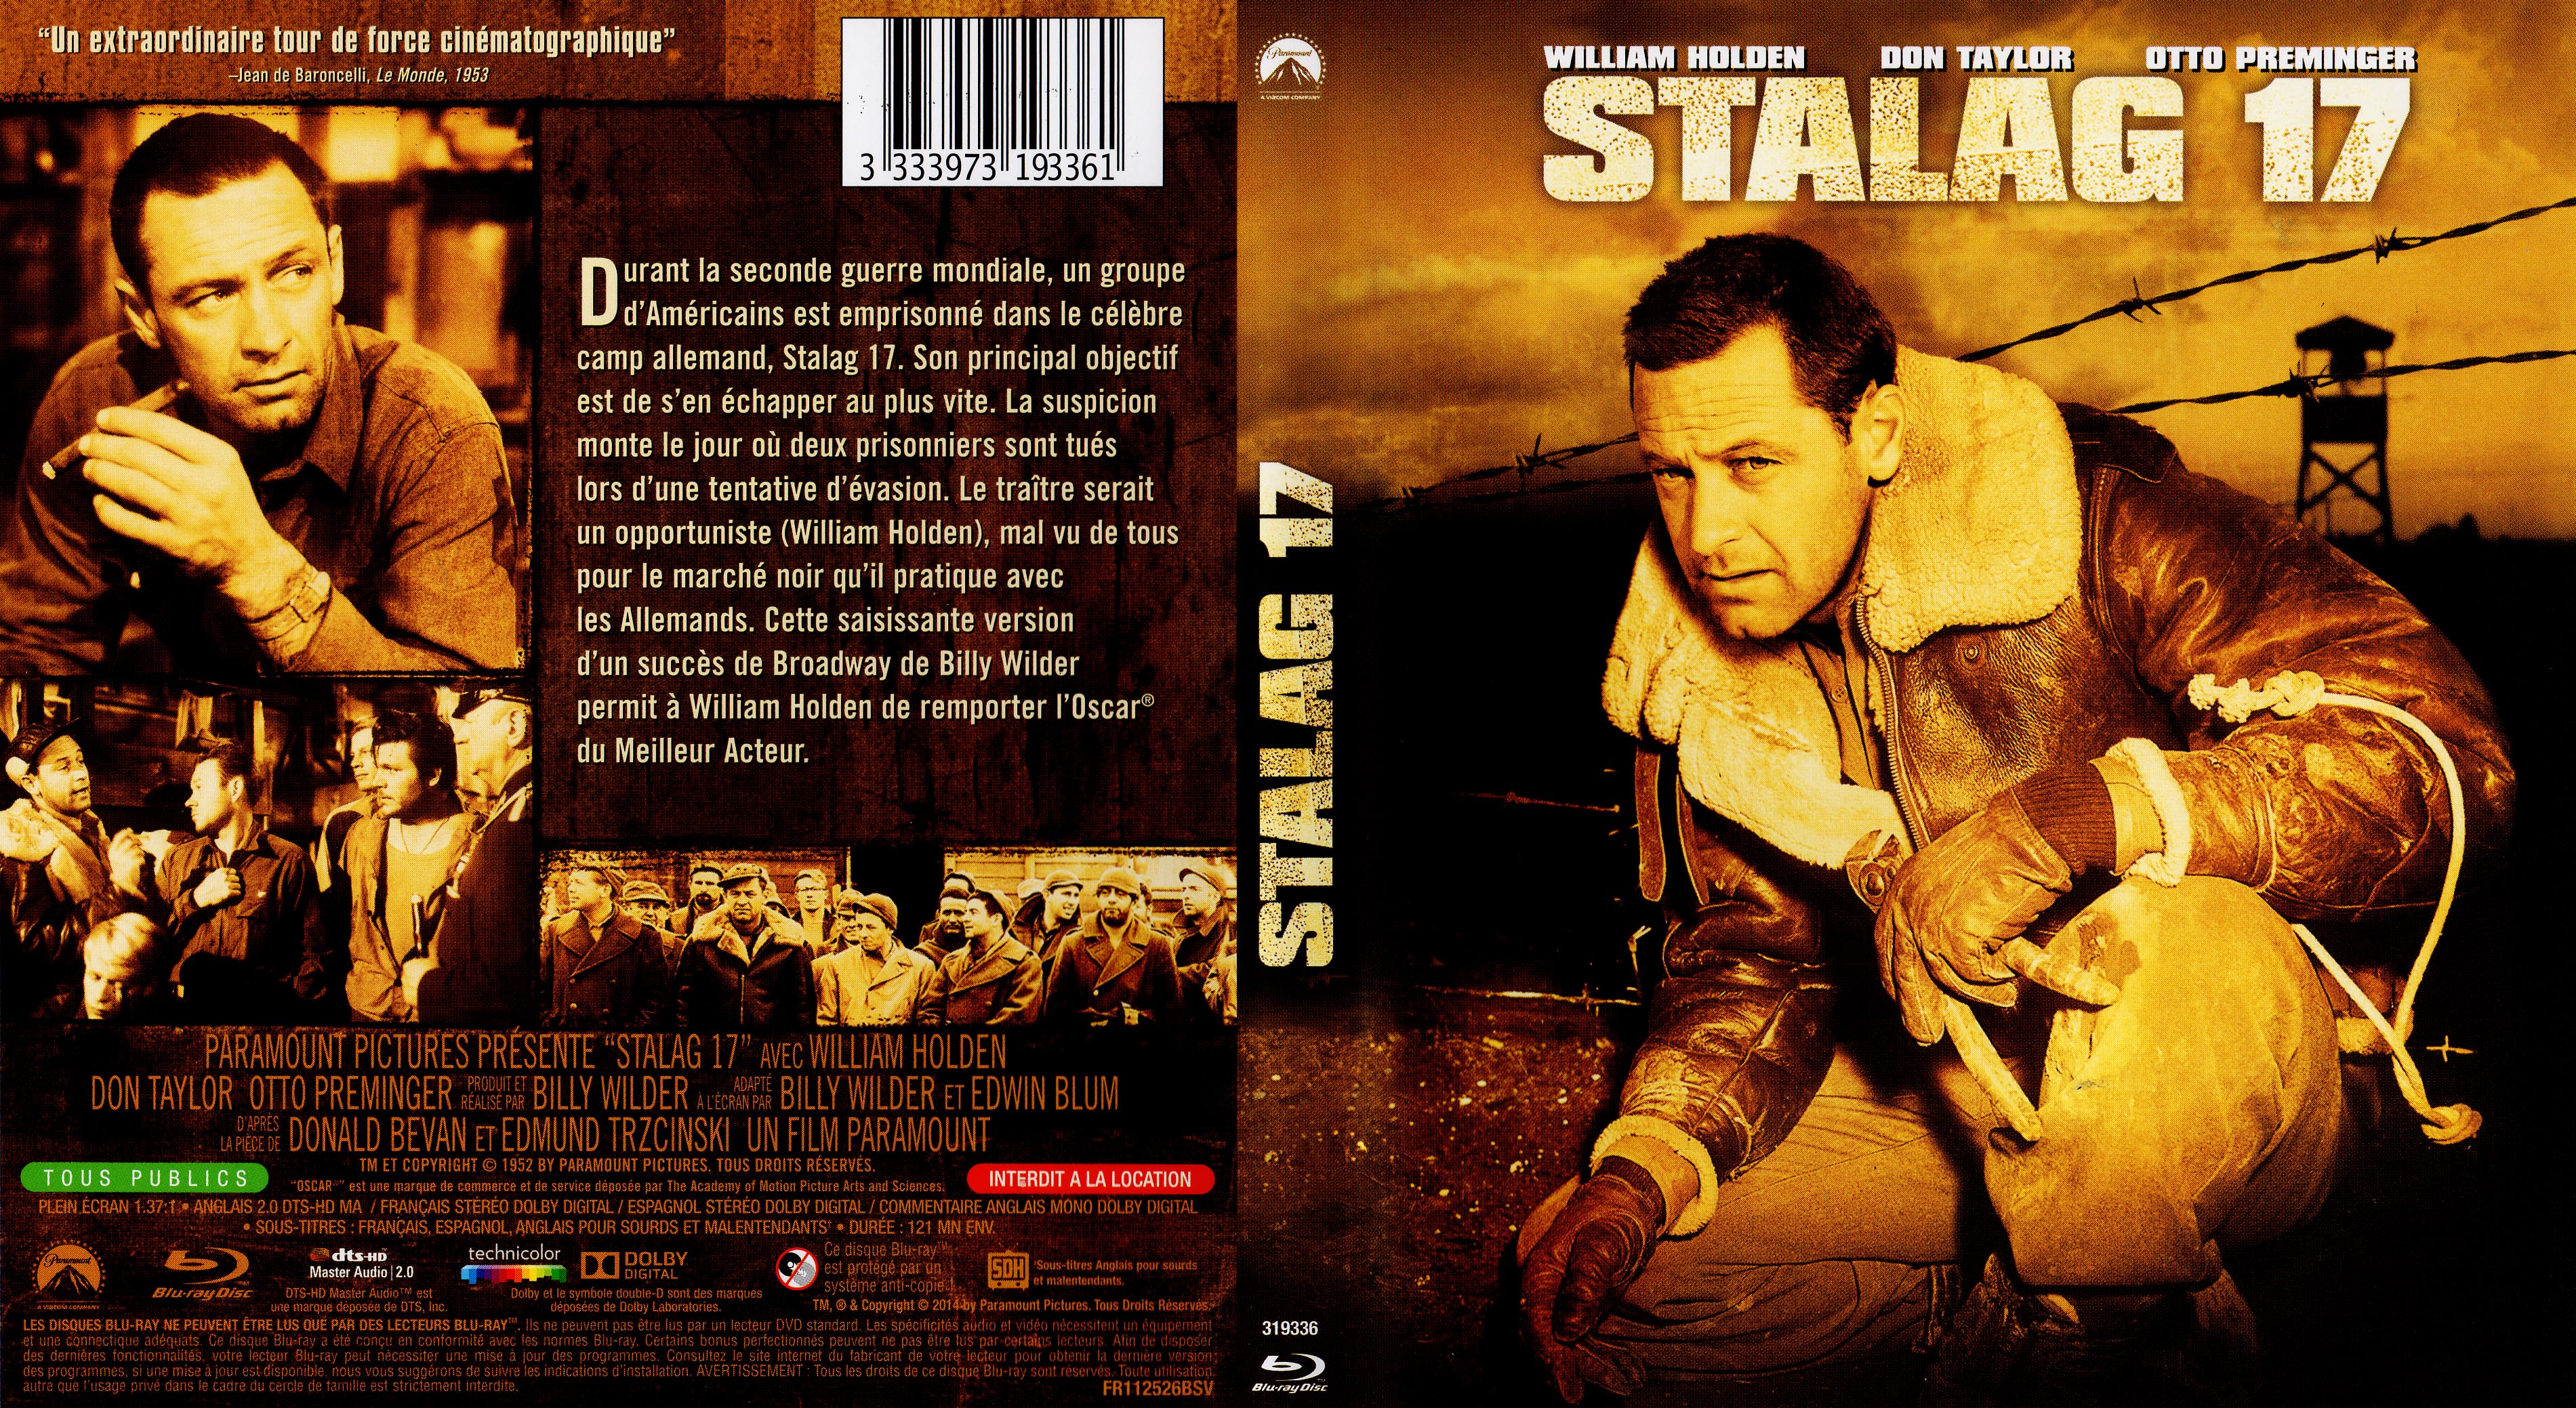 Jaquette DVD Stalag 17 (BLU-RAY)